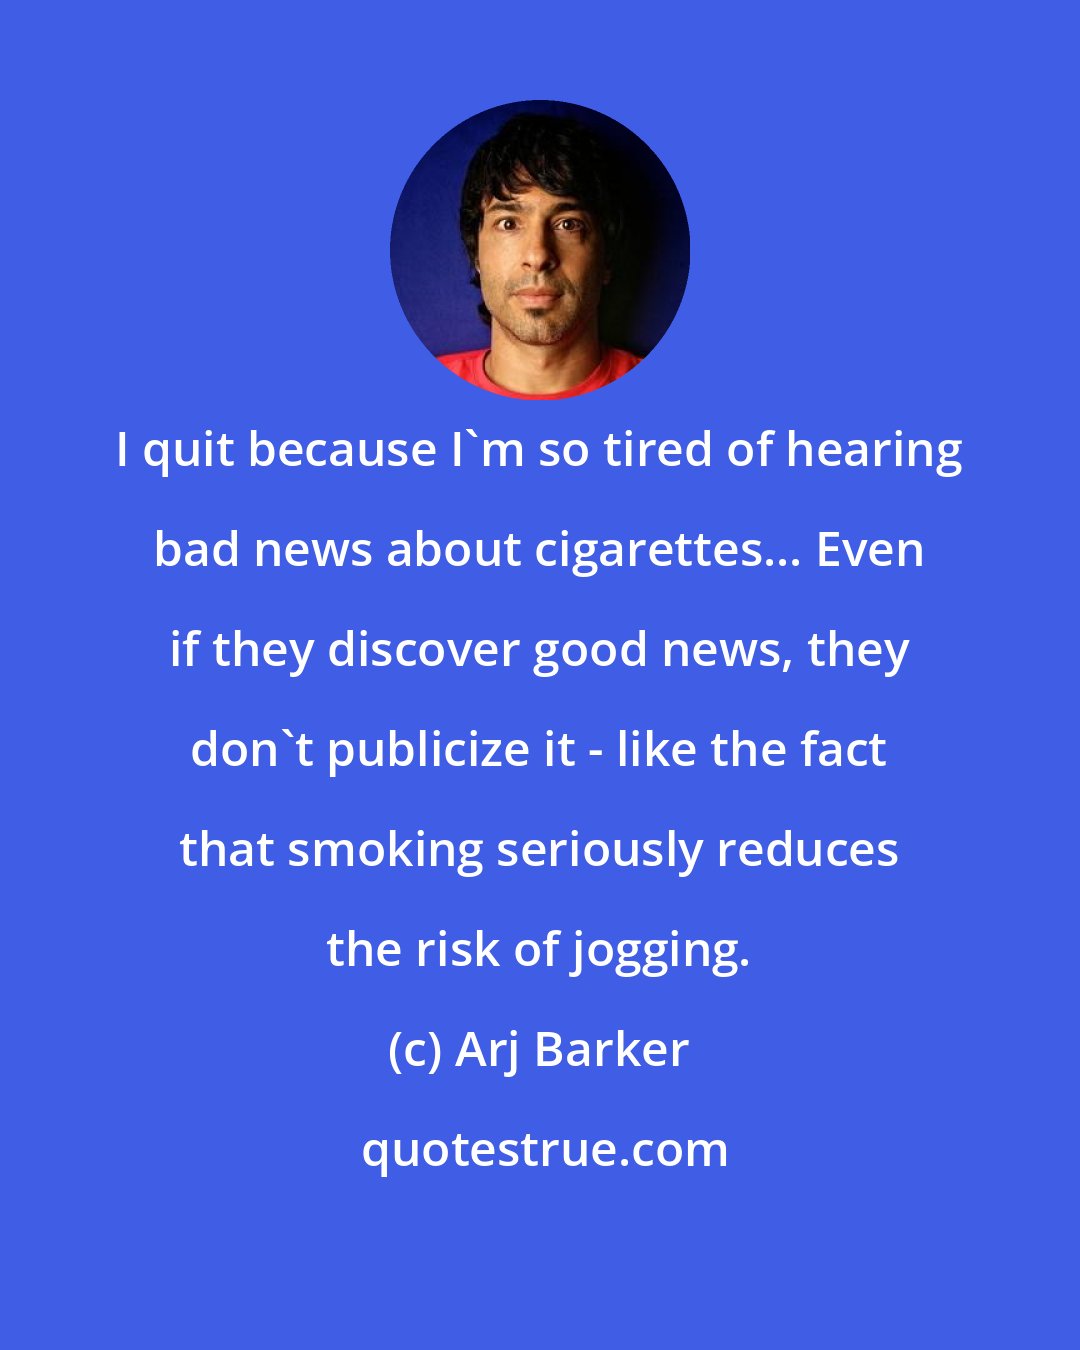 Arj Barker: I quit because I'm so tired of hearing bad news about cigarettes... Even if they discover good news, they don't publicize it - like the fact that smoking seriously reduces the risk of jogging.